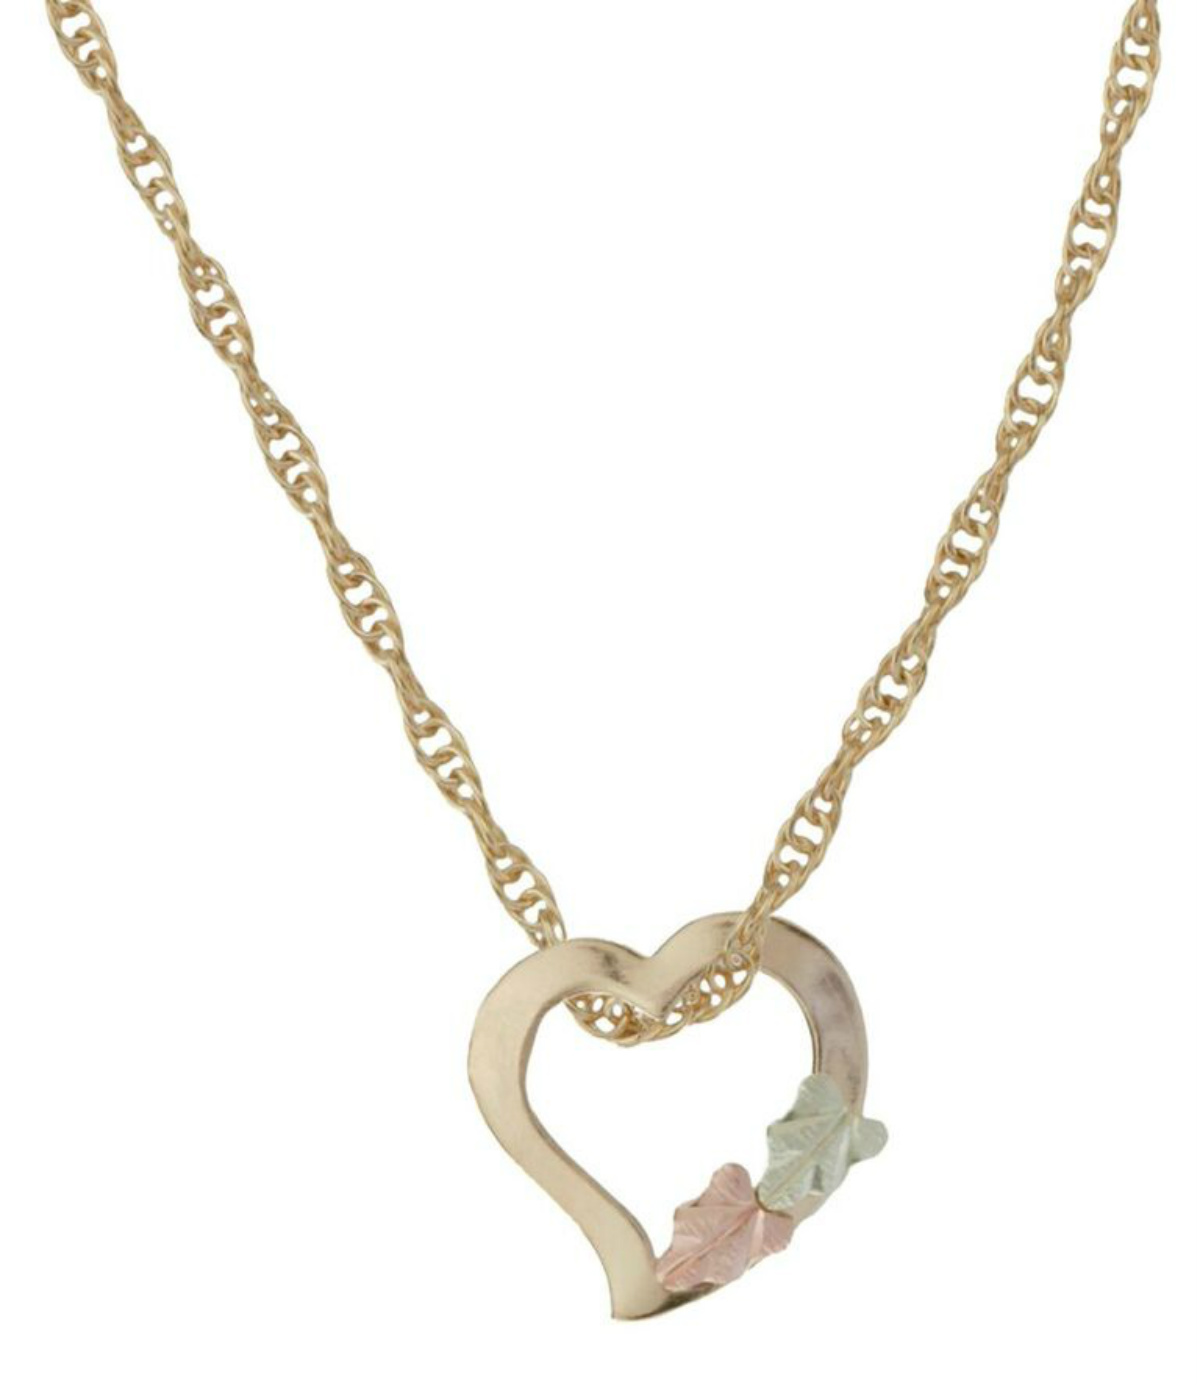 Heart Earrings and Necklace Matching Set, 10k Yellow Gold, 12k Green and Rose Gold Black Hills Gold Motif